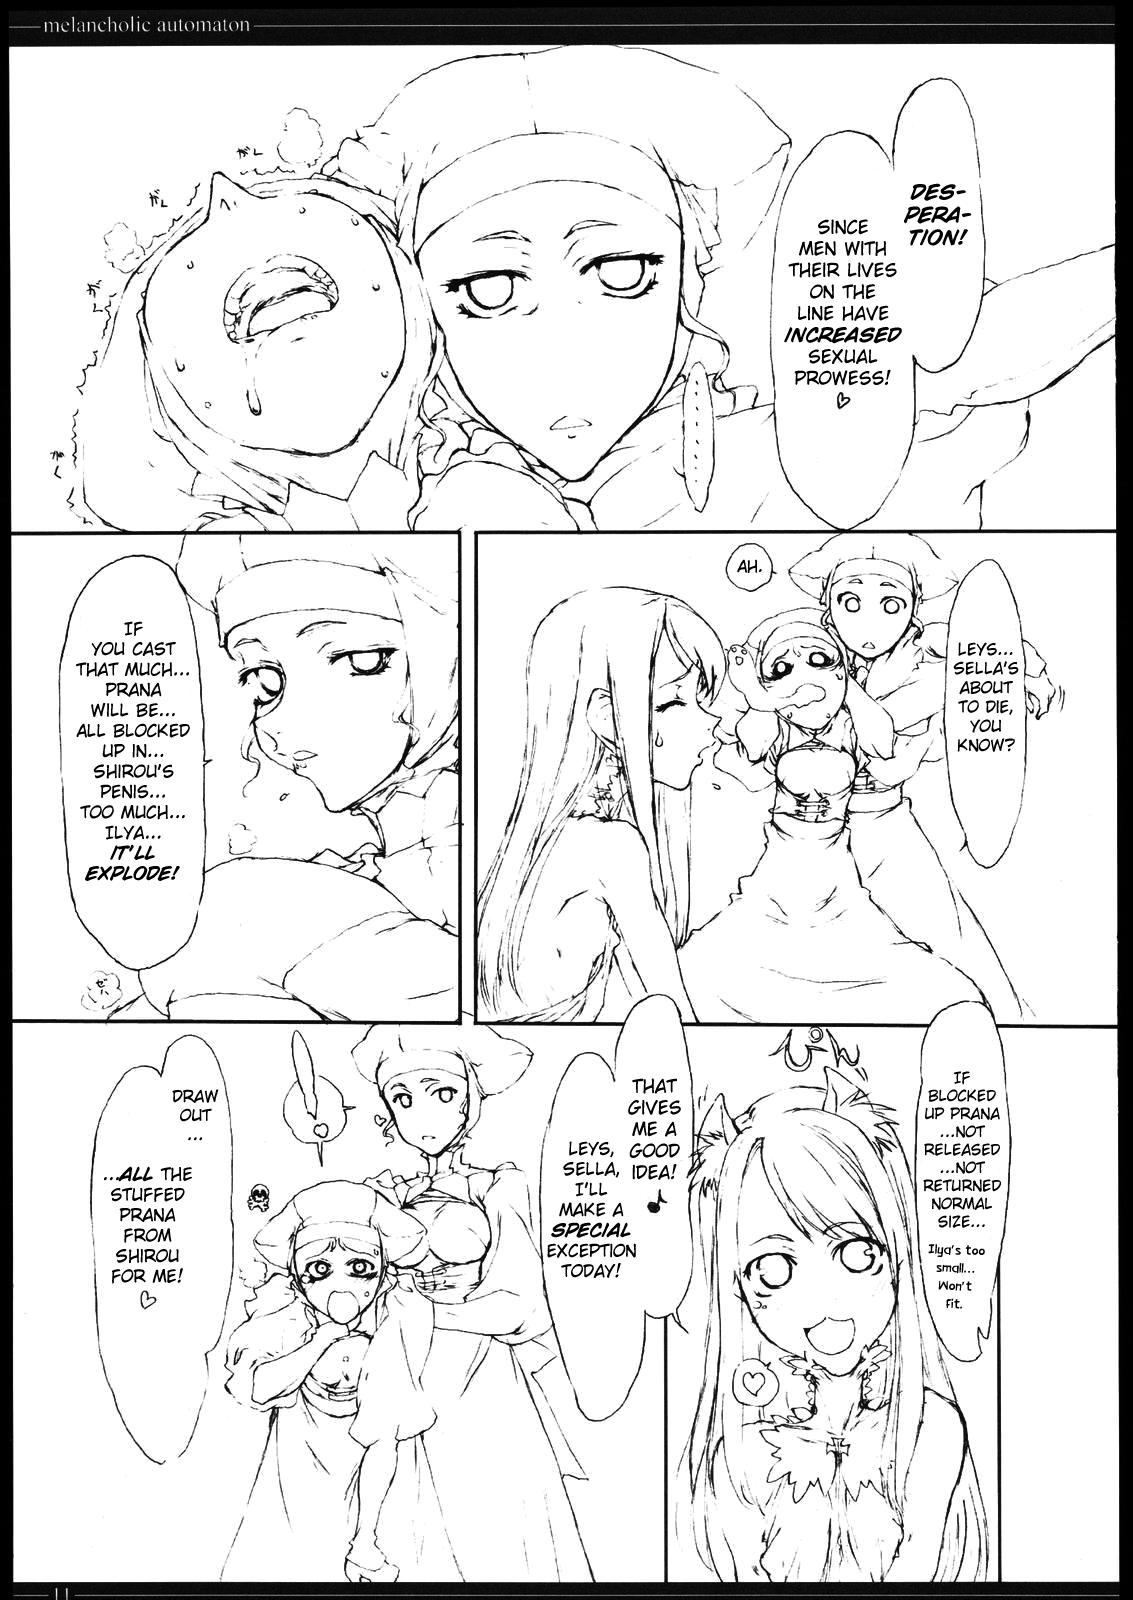 Spanish Melancholic Automaton - One day at the castle of Einzbern - Fate stay night Sex Toys - Page 10